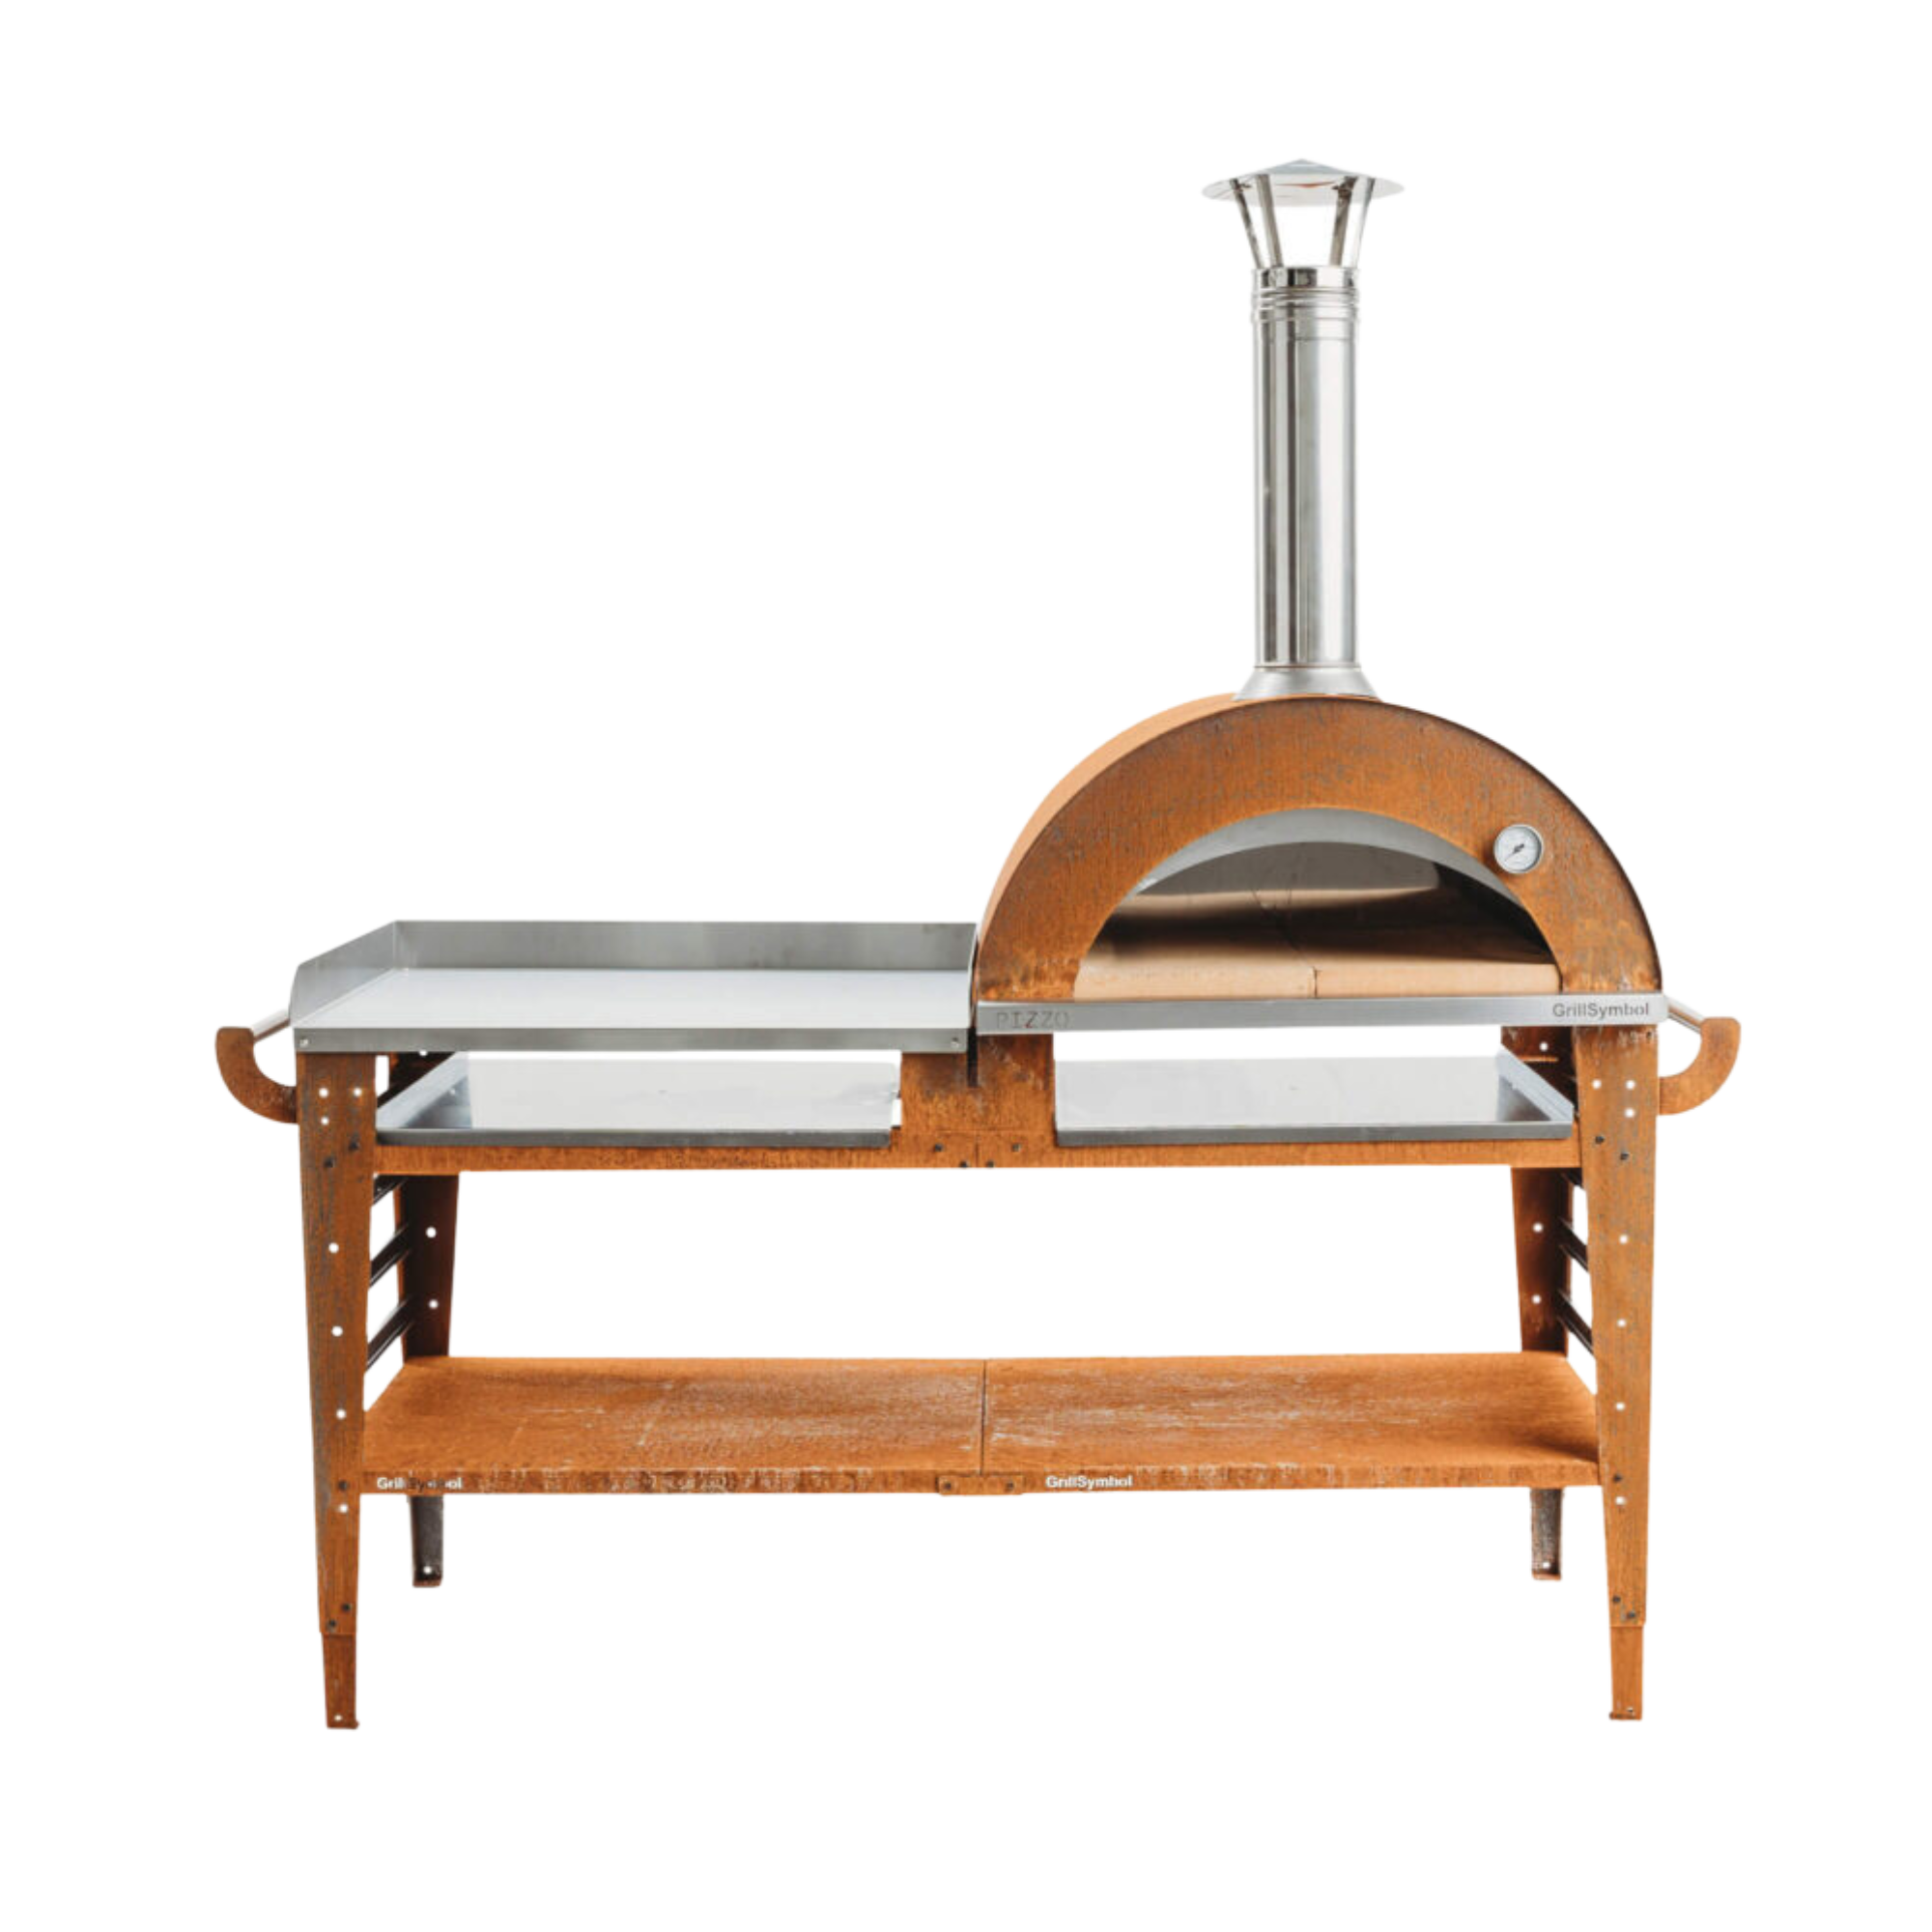 Pizzo-XL-Set Wood Fired Pizza Oven with Stand & Side Table